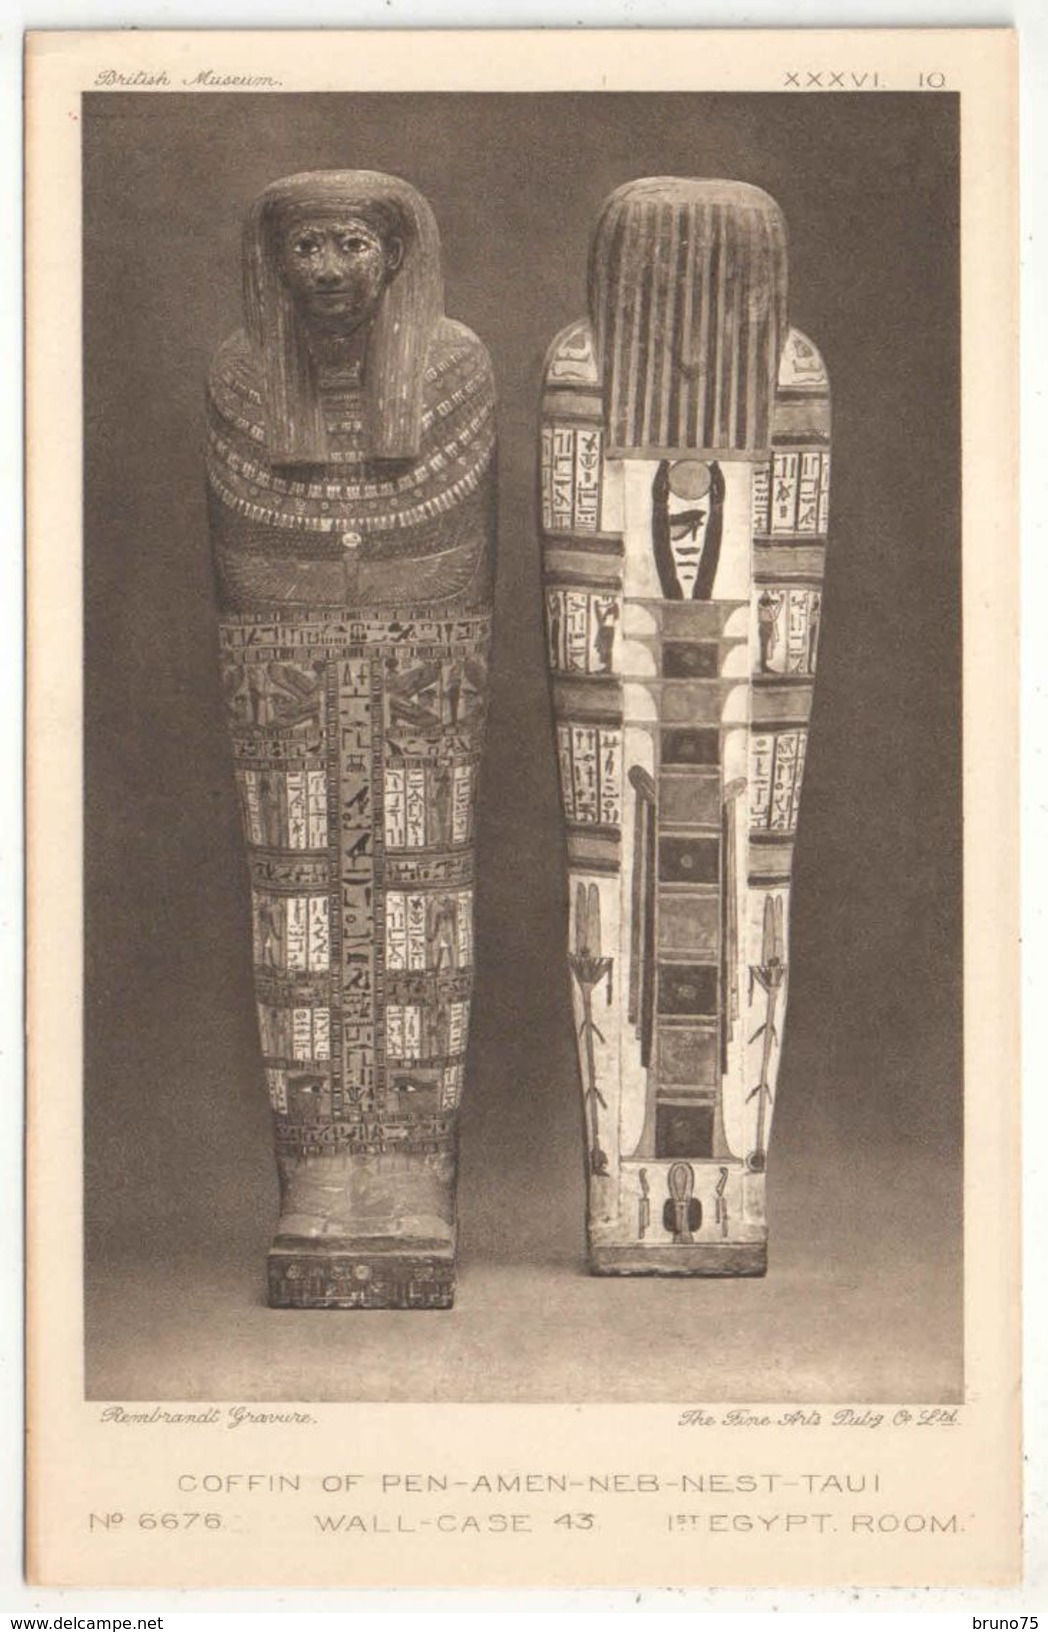 Coffin Of Pen-Amen-Neb-Nest-Taui - N°6676 - Wall-Case 43 - 1st Egypt Room - British Museum - Musées